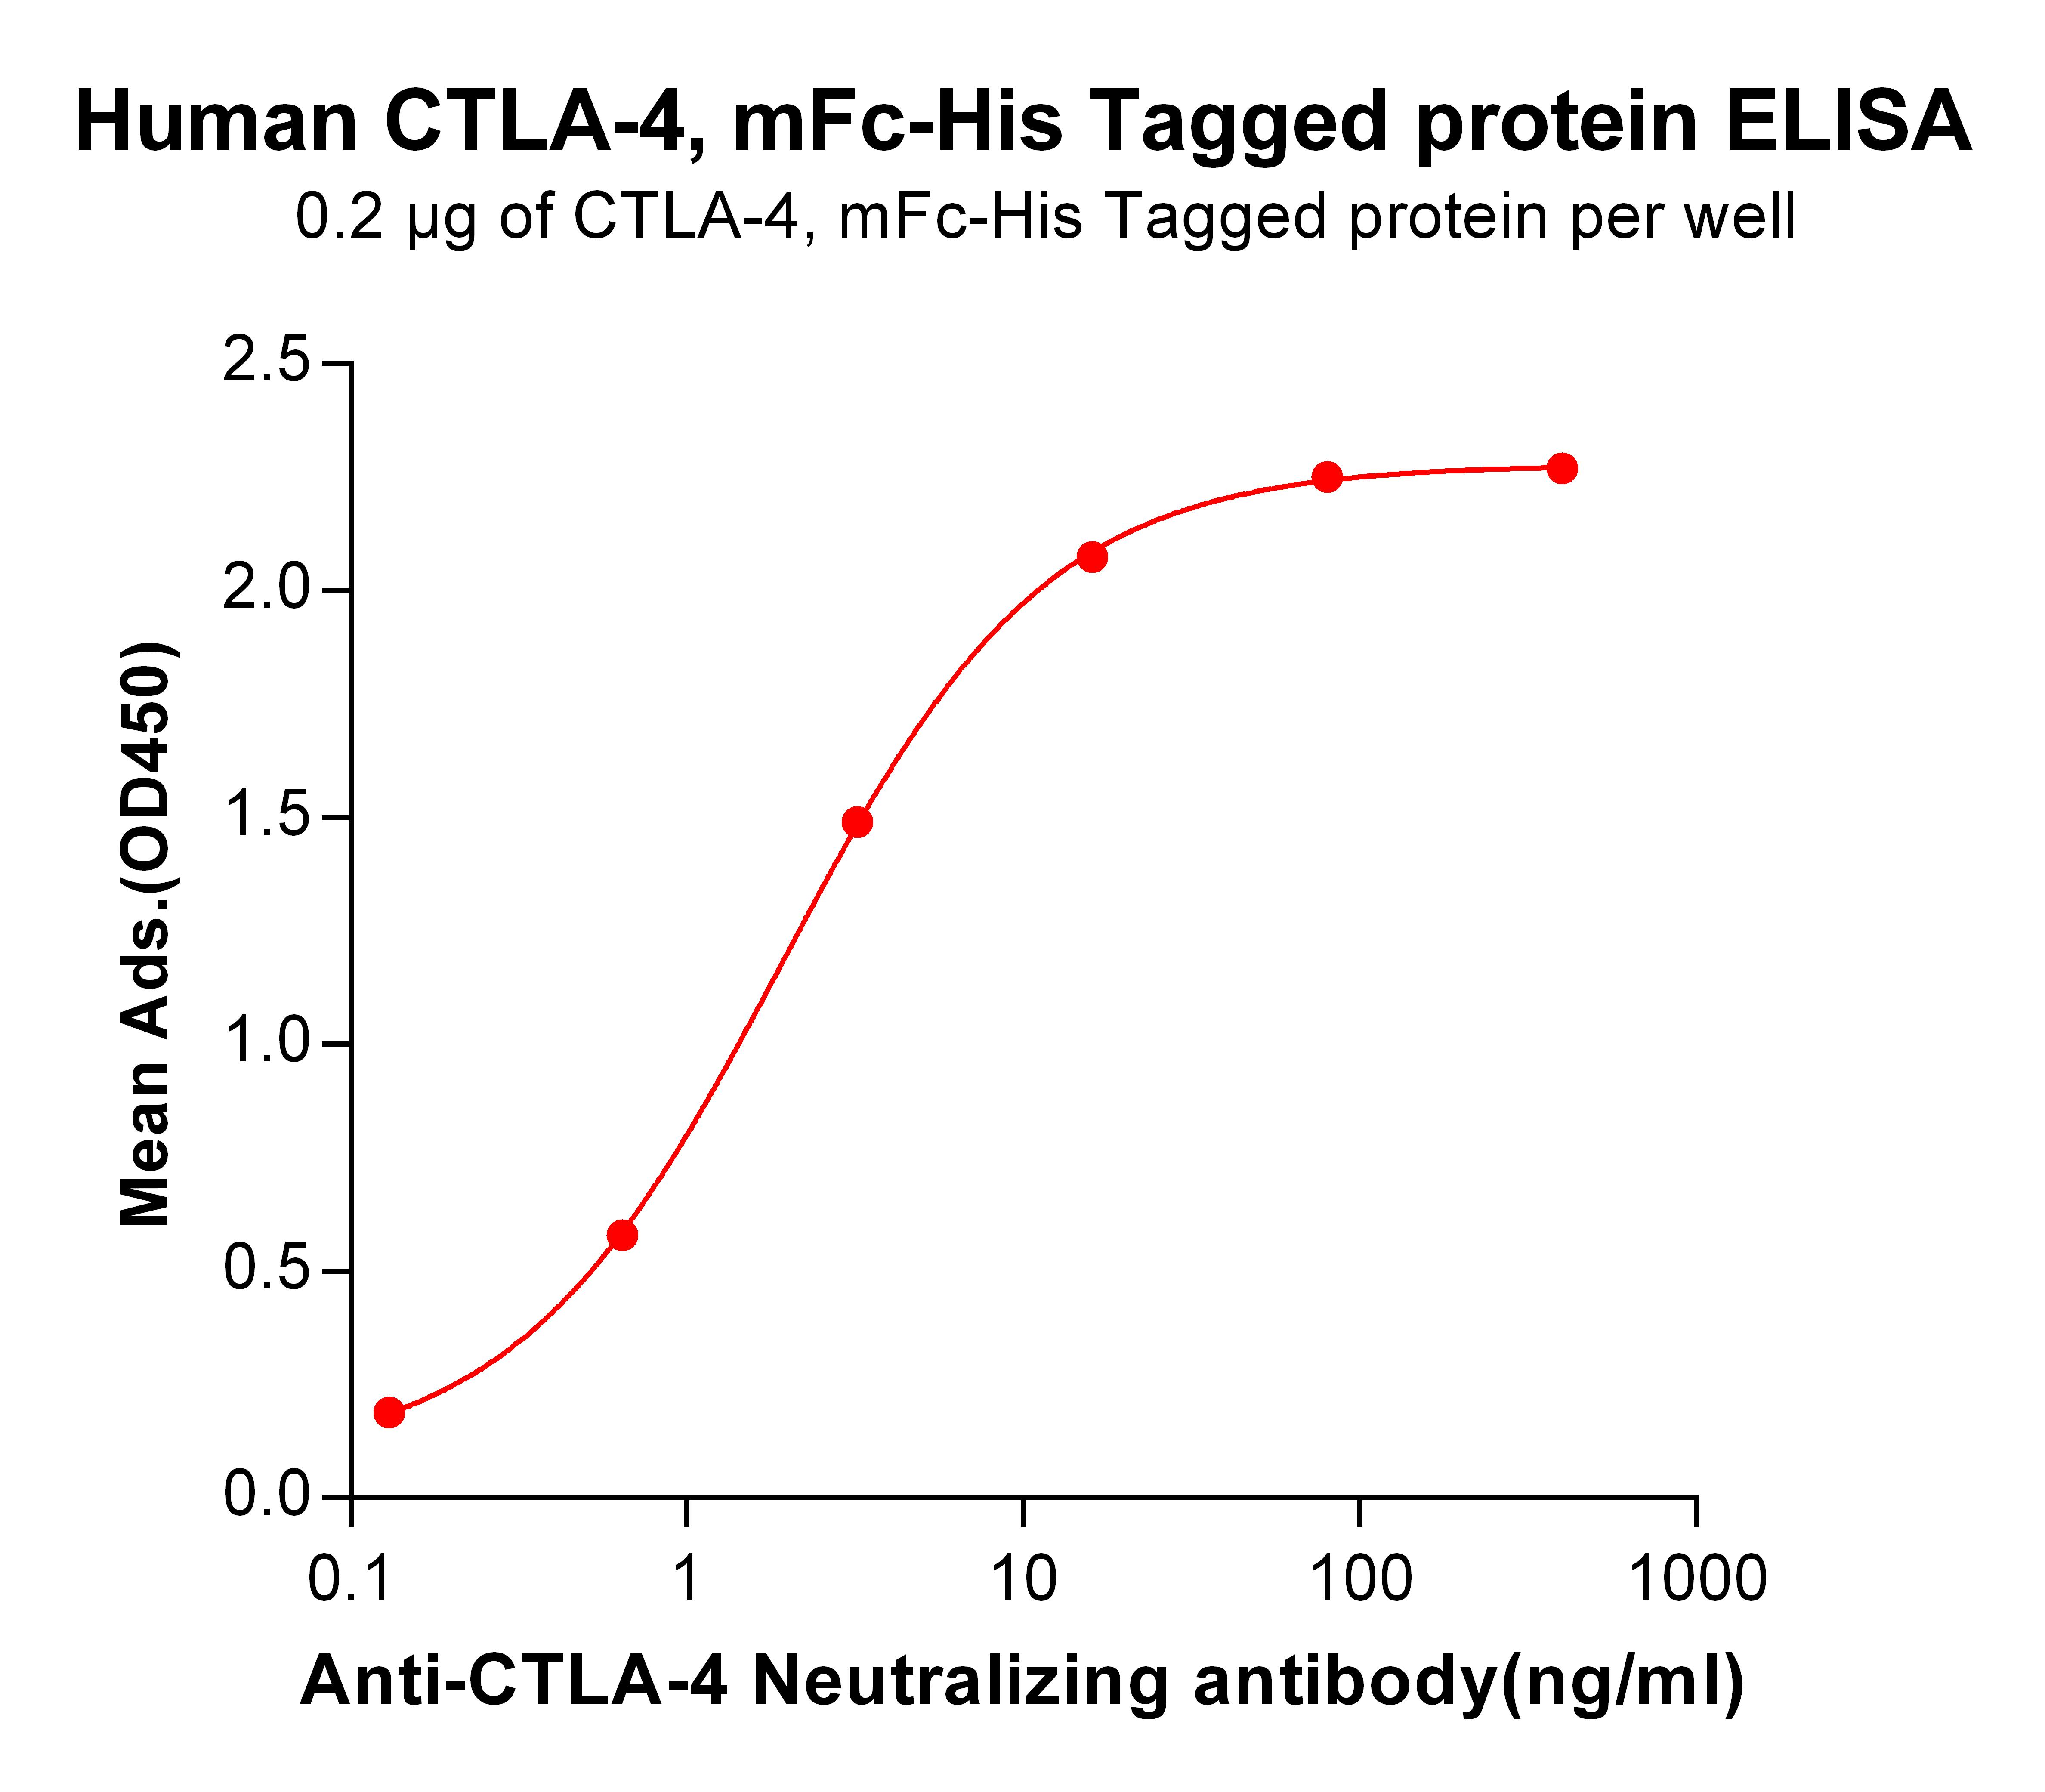 Figure 4. ELISA plate pre-coated by 2 µg/ml (100 µl/well) Human CTLA-4, mFc-His tagged protein  can bind Anti-CTLA-4 Neutralizing antibody  in a linear range of 0.13-16.0 ng/ml.